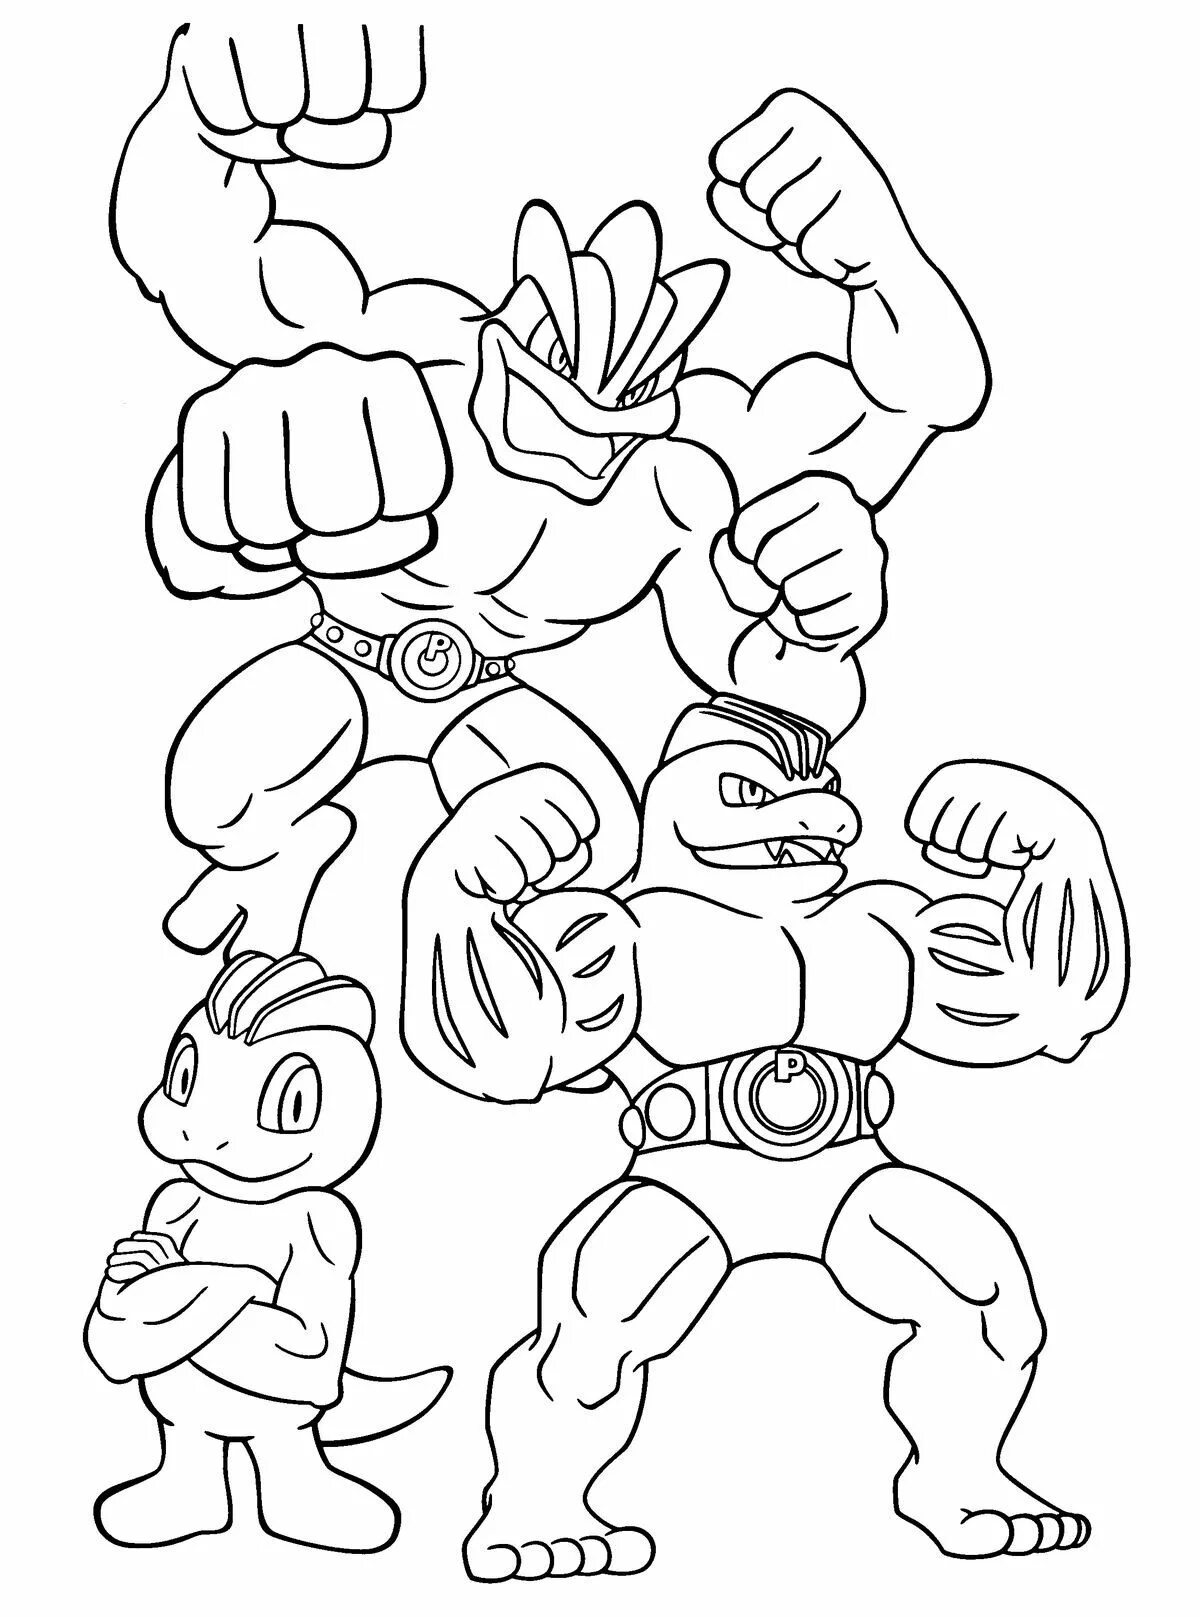 Creative gujutsu character coloring pages for kids